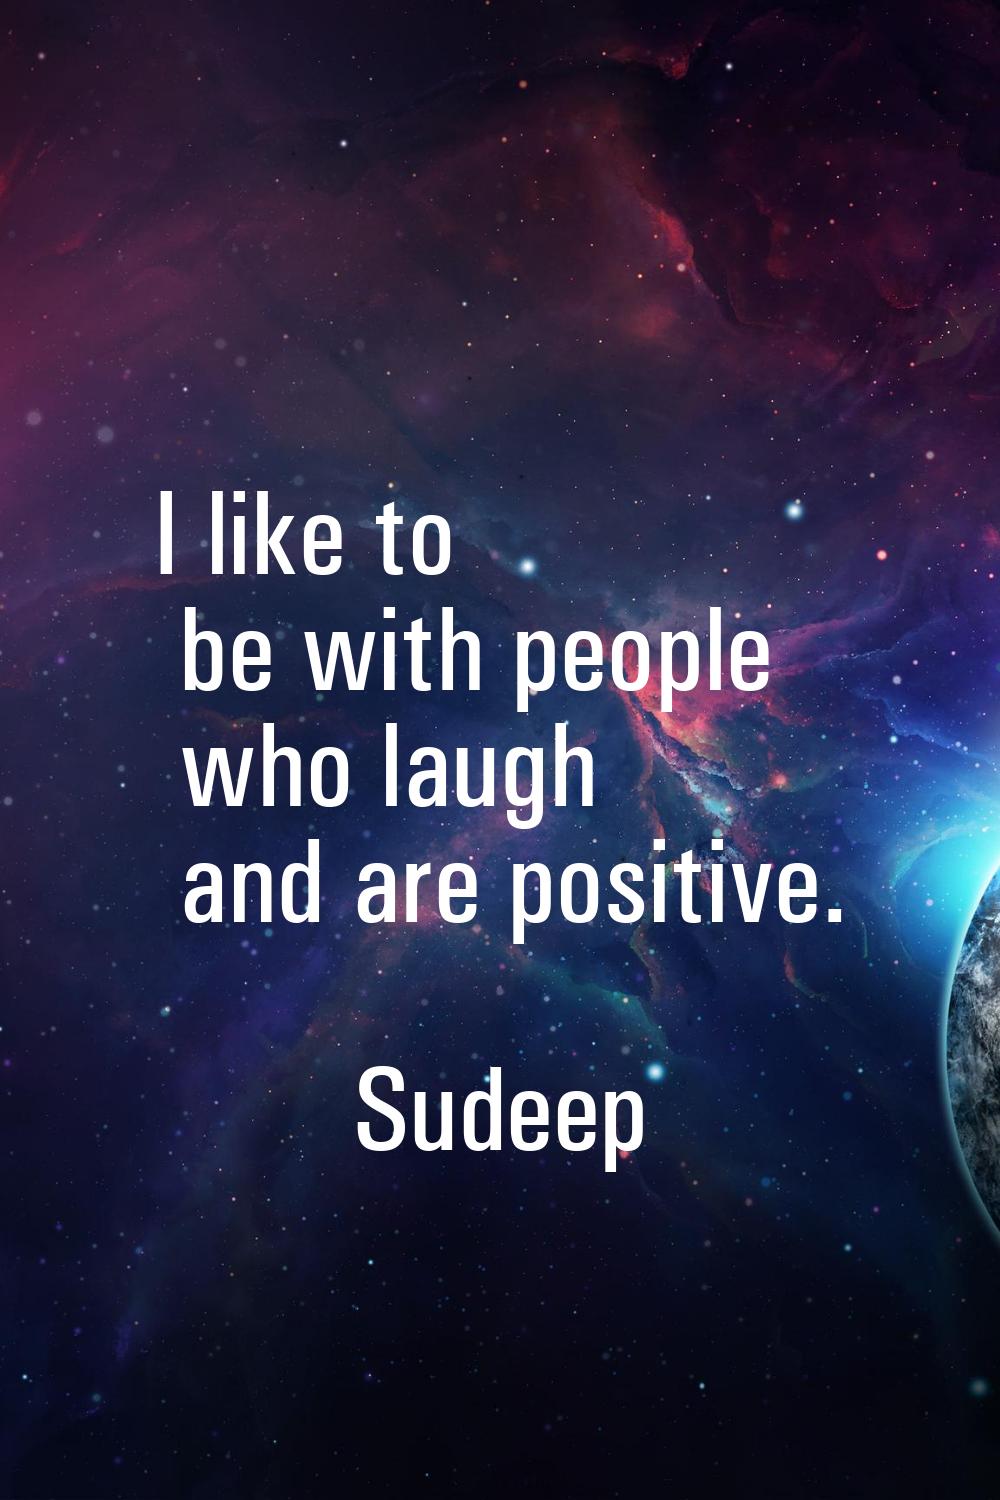 I like to be with people who laugh and are positive.